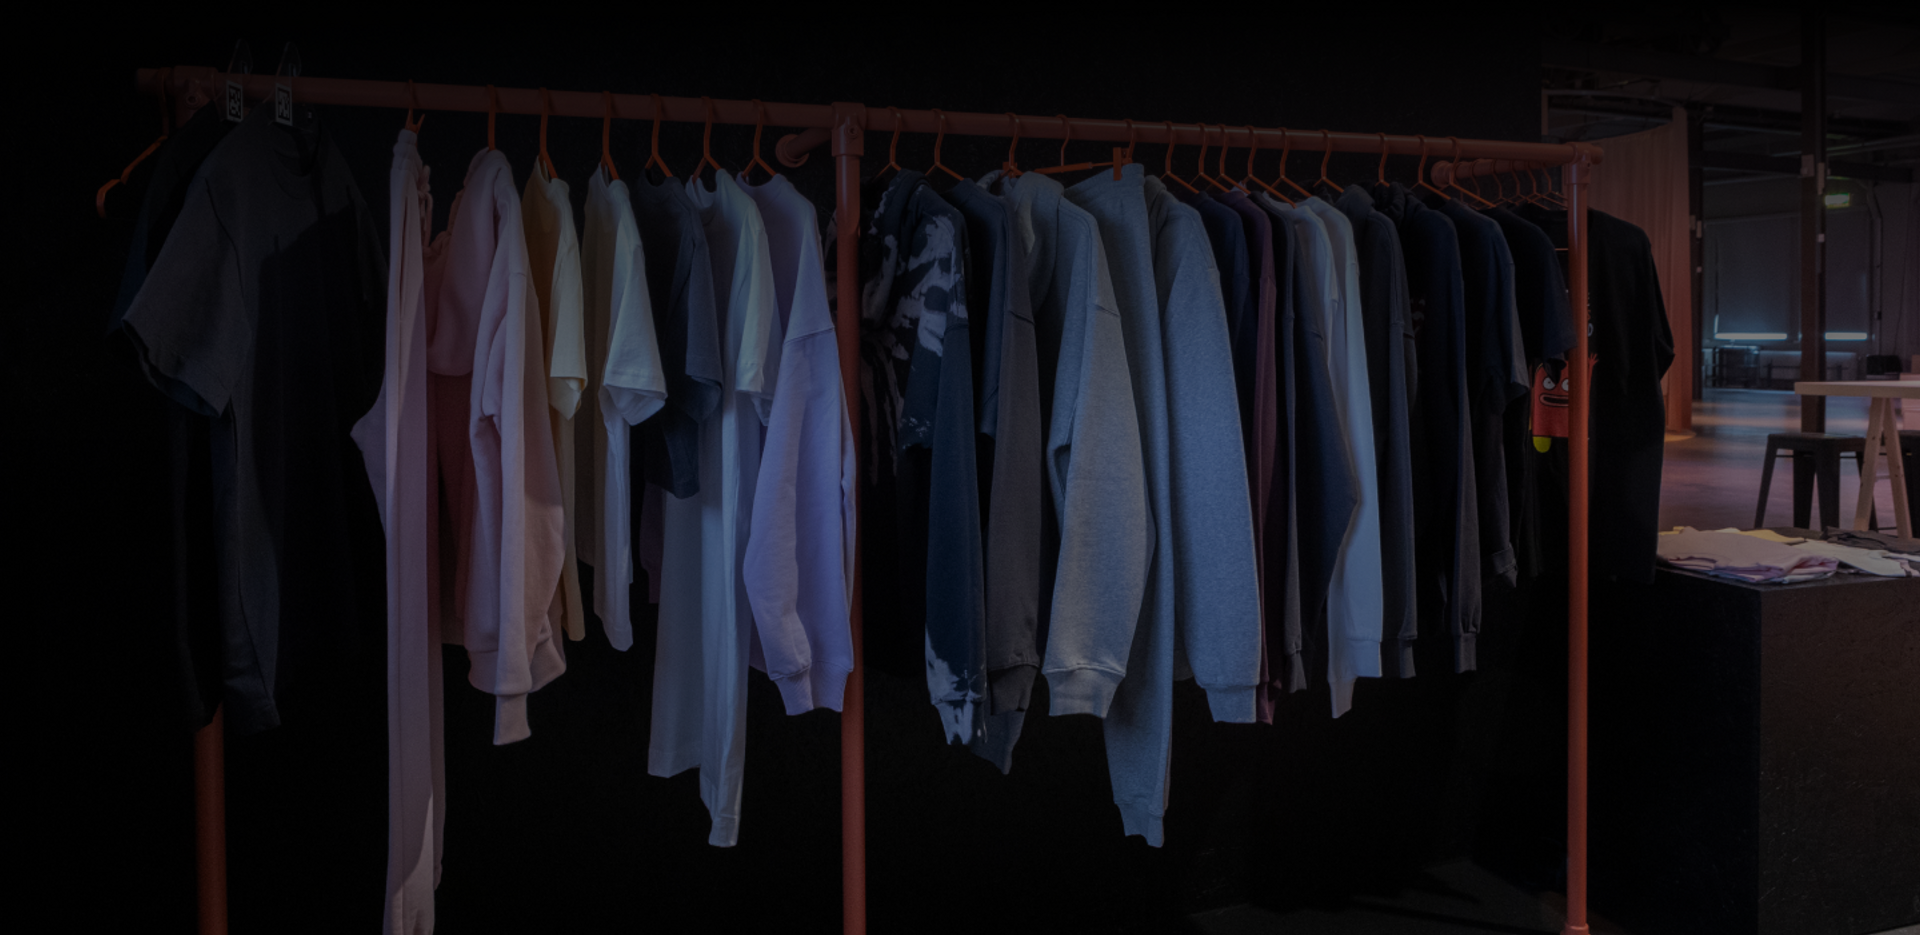 A collection of True Blanks garments hanging on a clothes rack